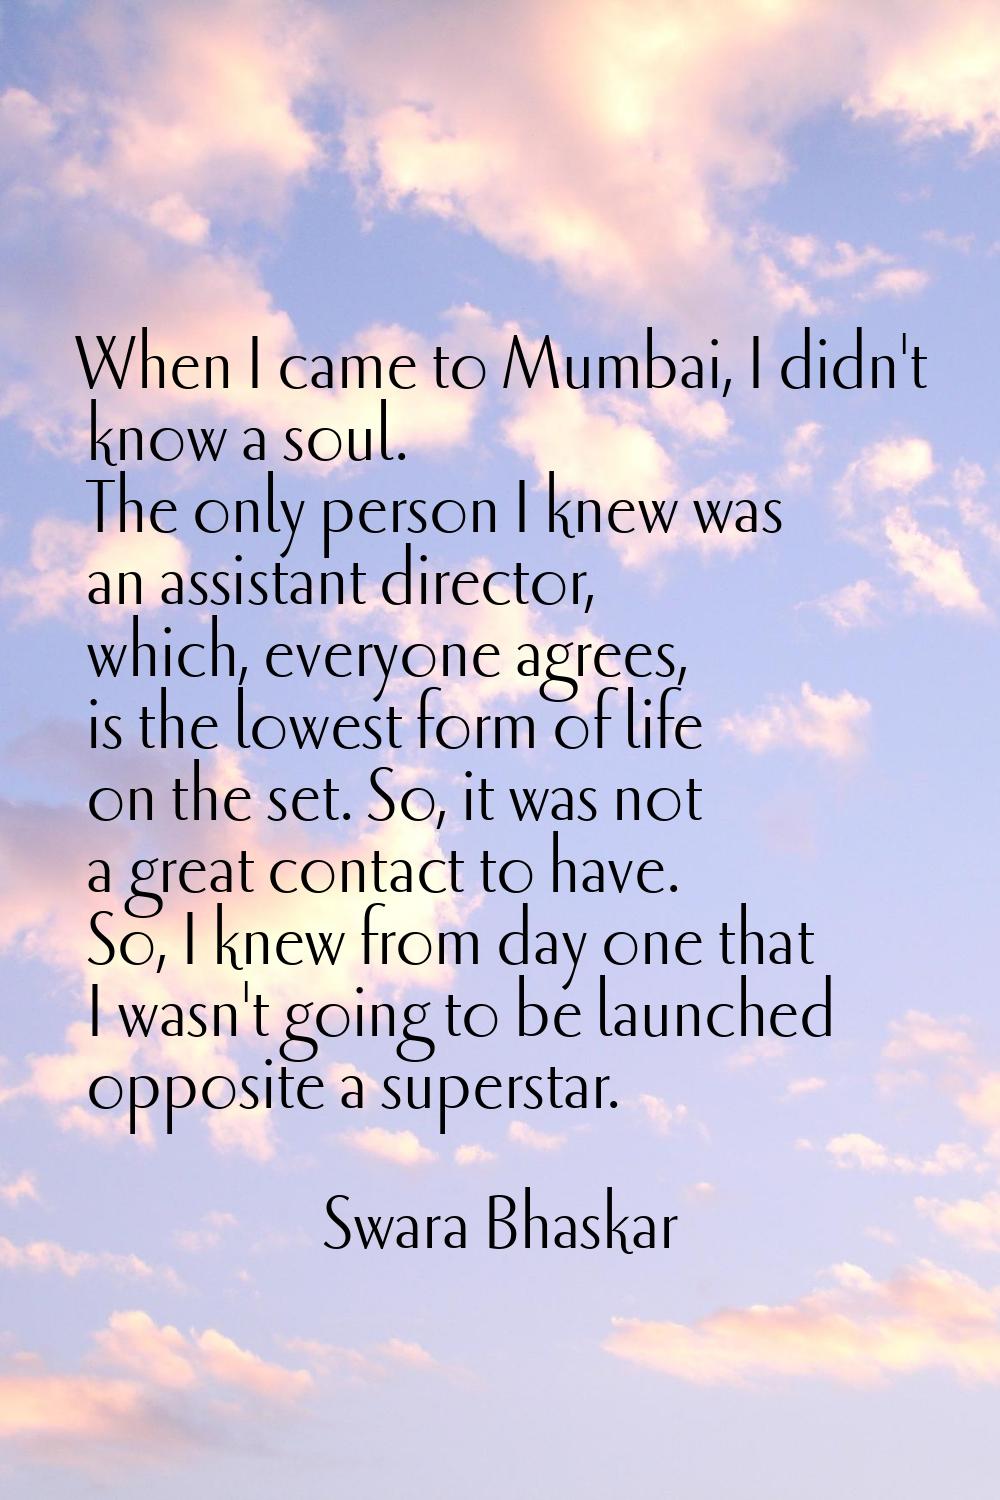 When I came to Mumbai, I didn't know a soul. The only person I knew was an assistant director, whic